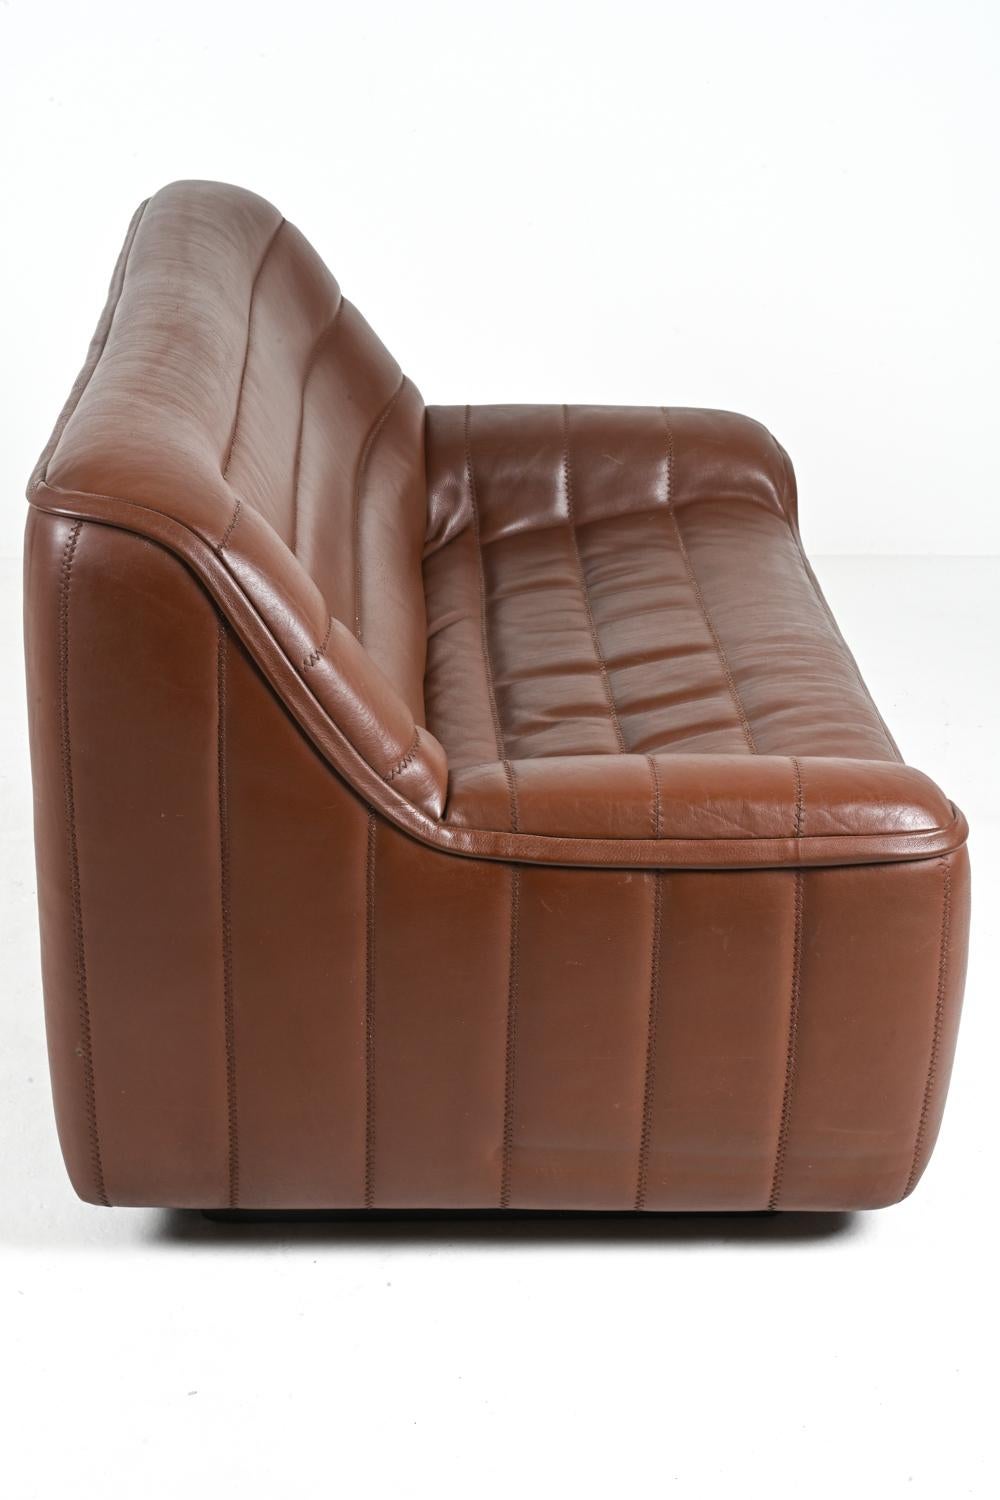 De Sede DS-84 Leather Two-Seat Sofa, c. 1970's For Sale 10